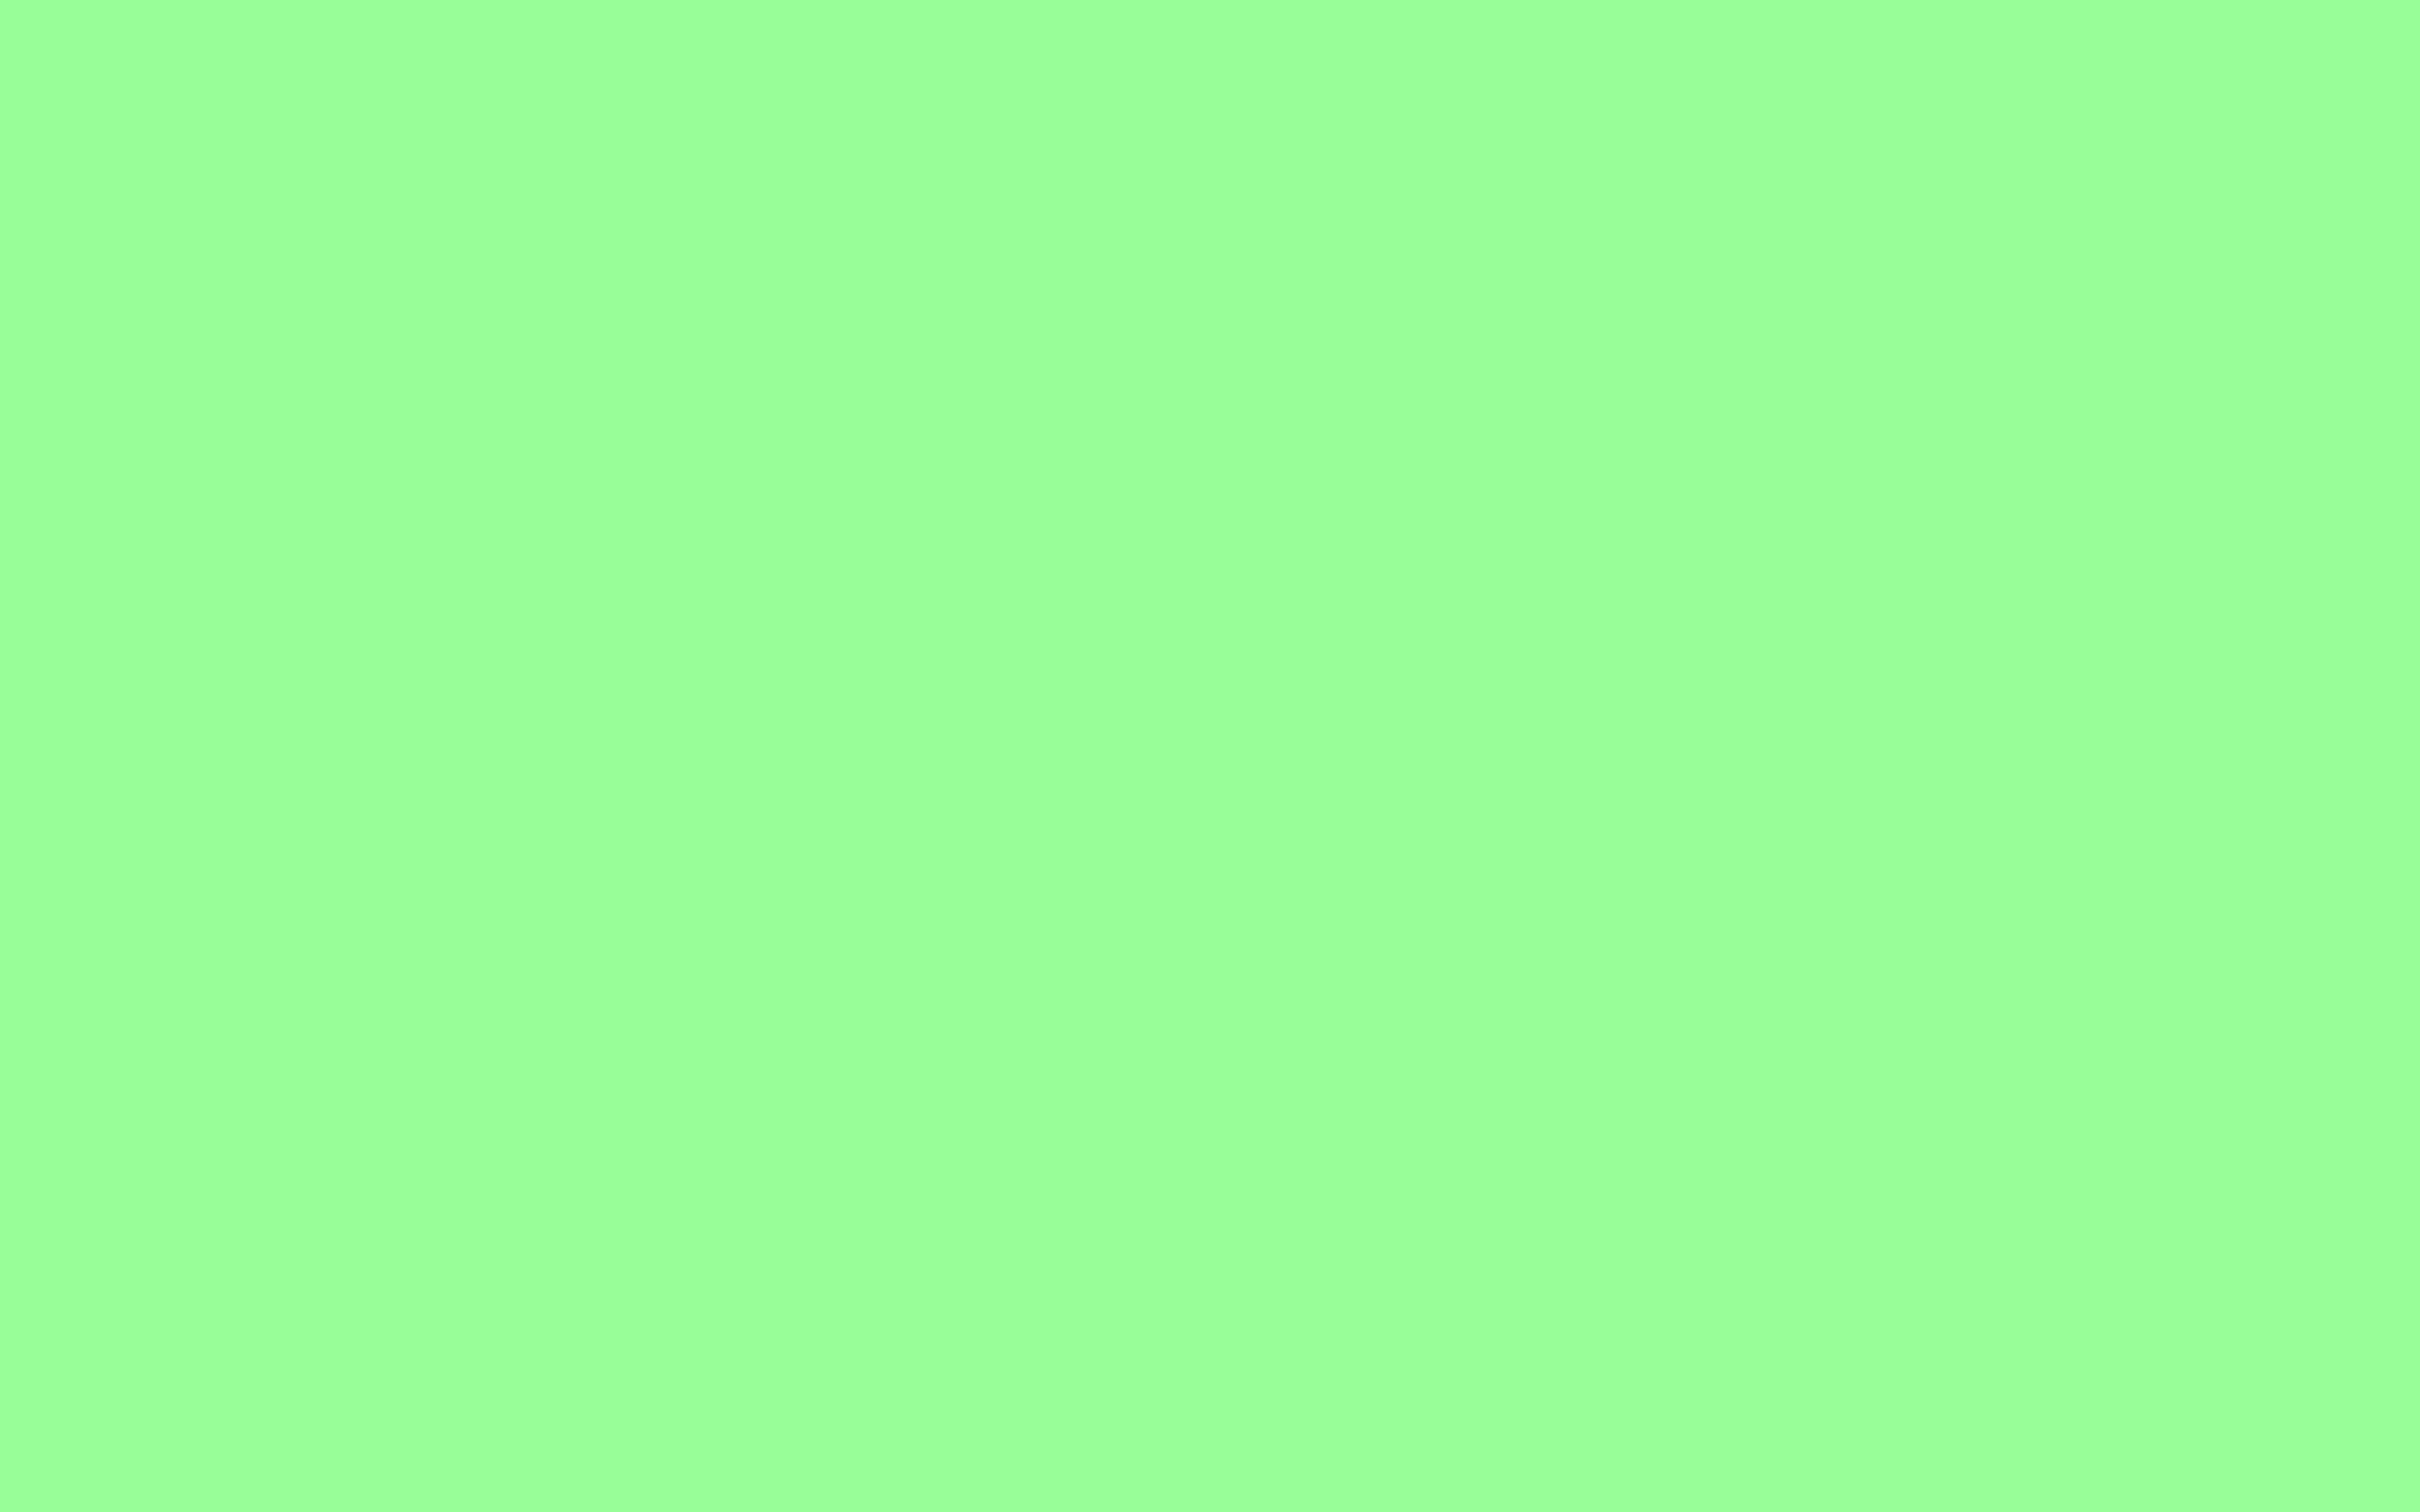 Mint Green Background Solid - 1280x1024 Mint Green Solid Color ...